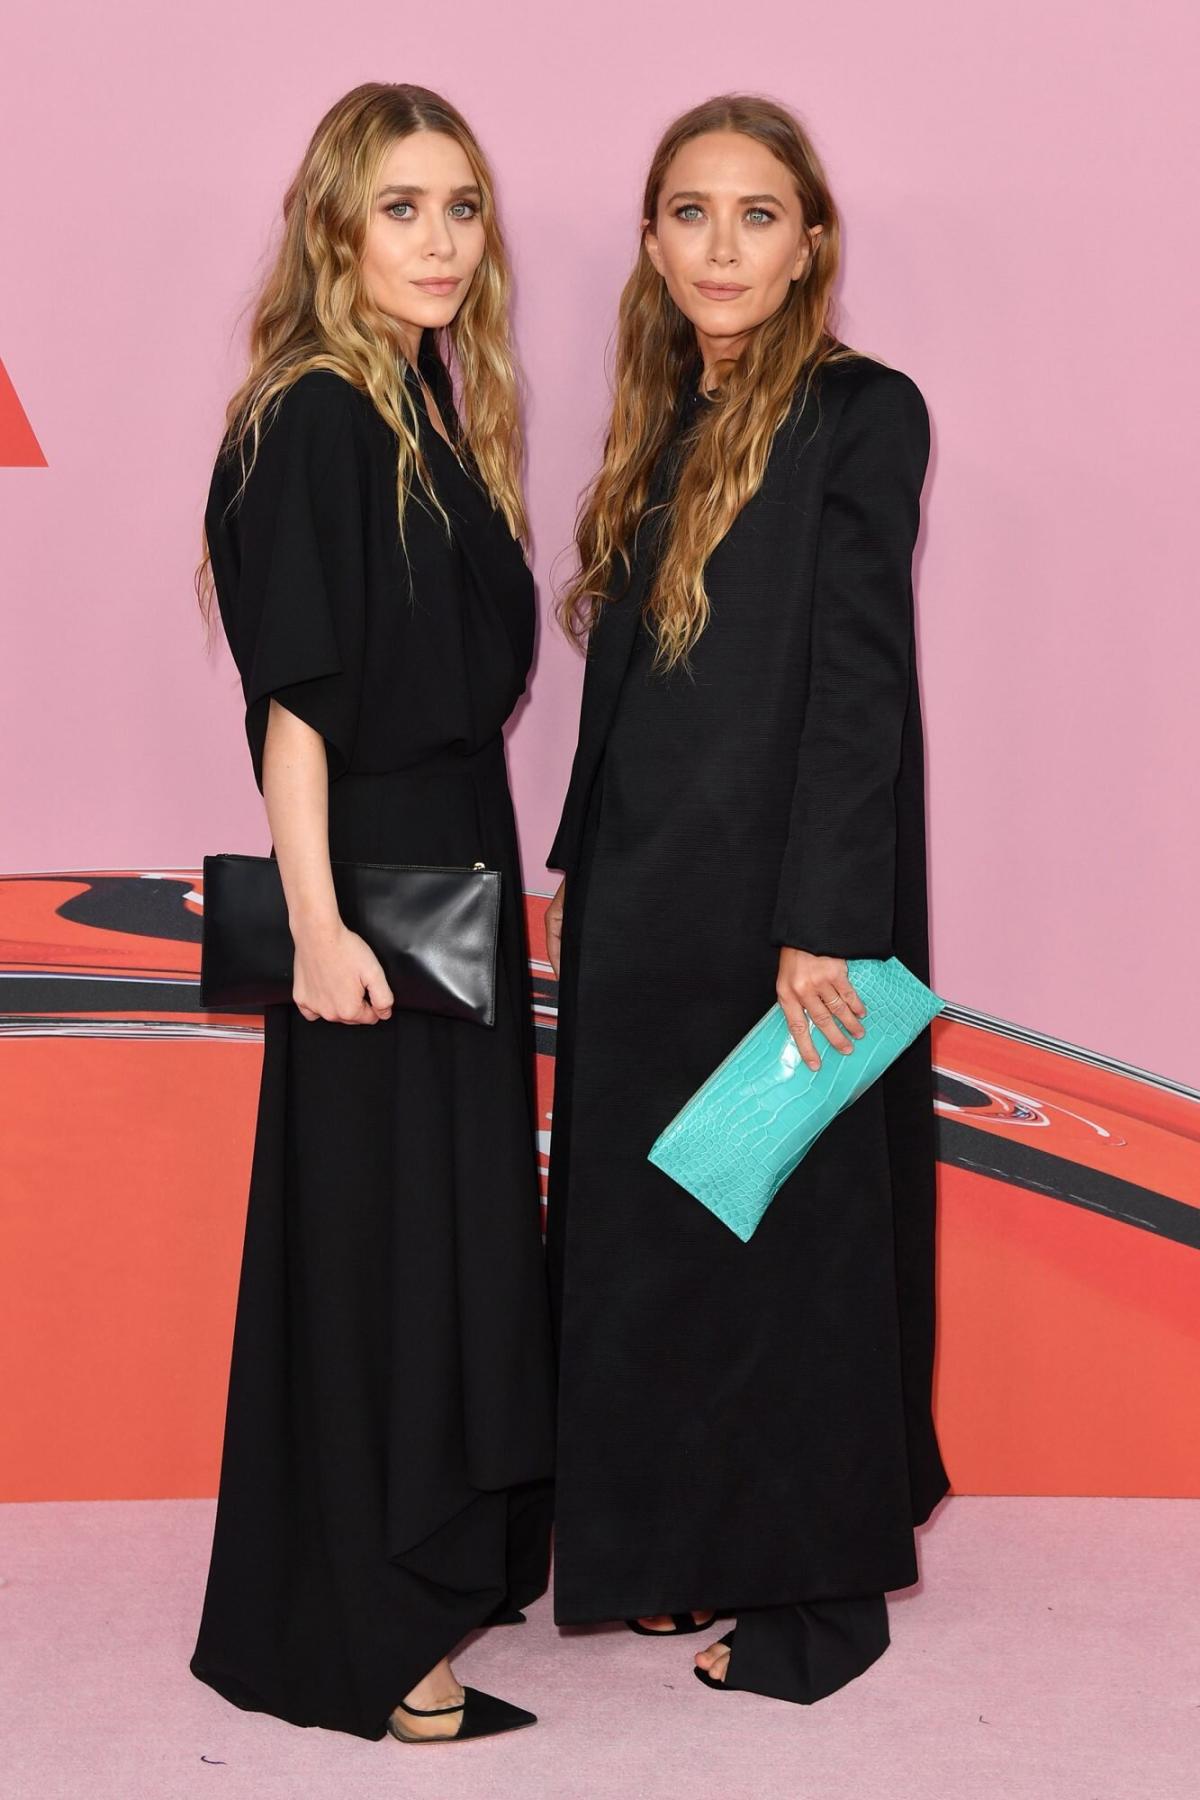 Vend om Åbent slap af Mary-Kate Olsen Reveals Why She and Twin Sister Ashley Are 'Discreet'  People in Rare Interview